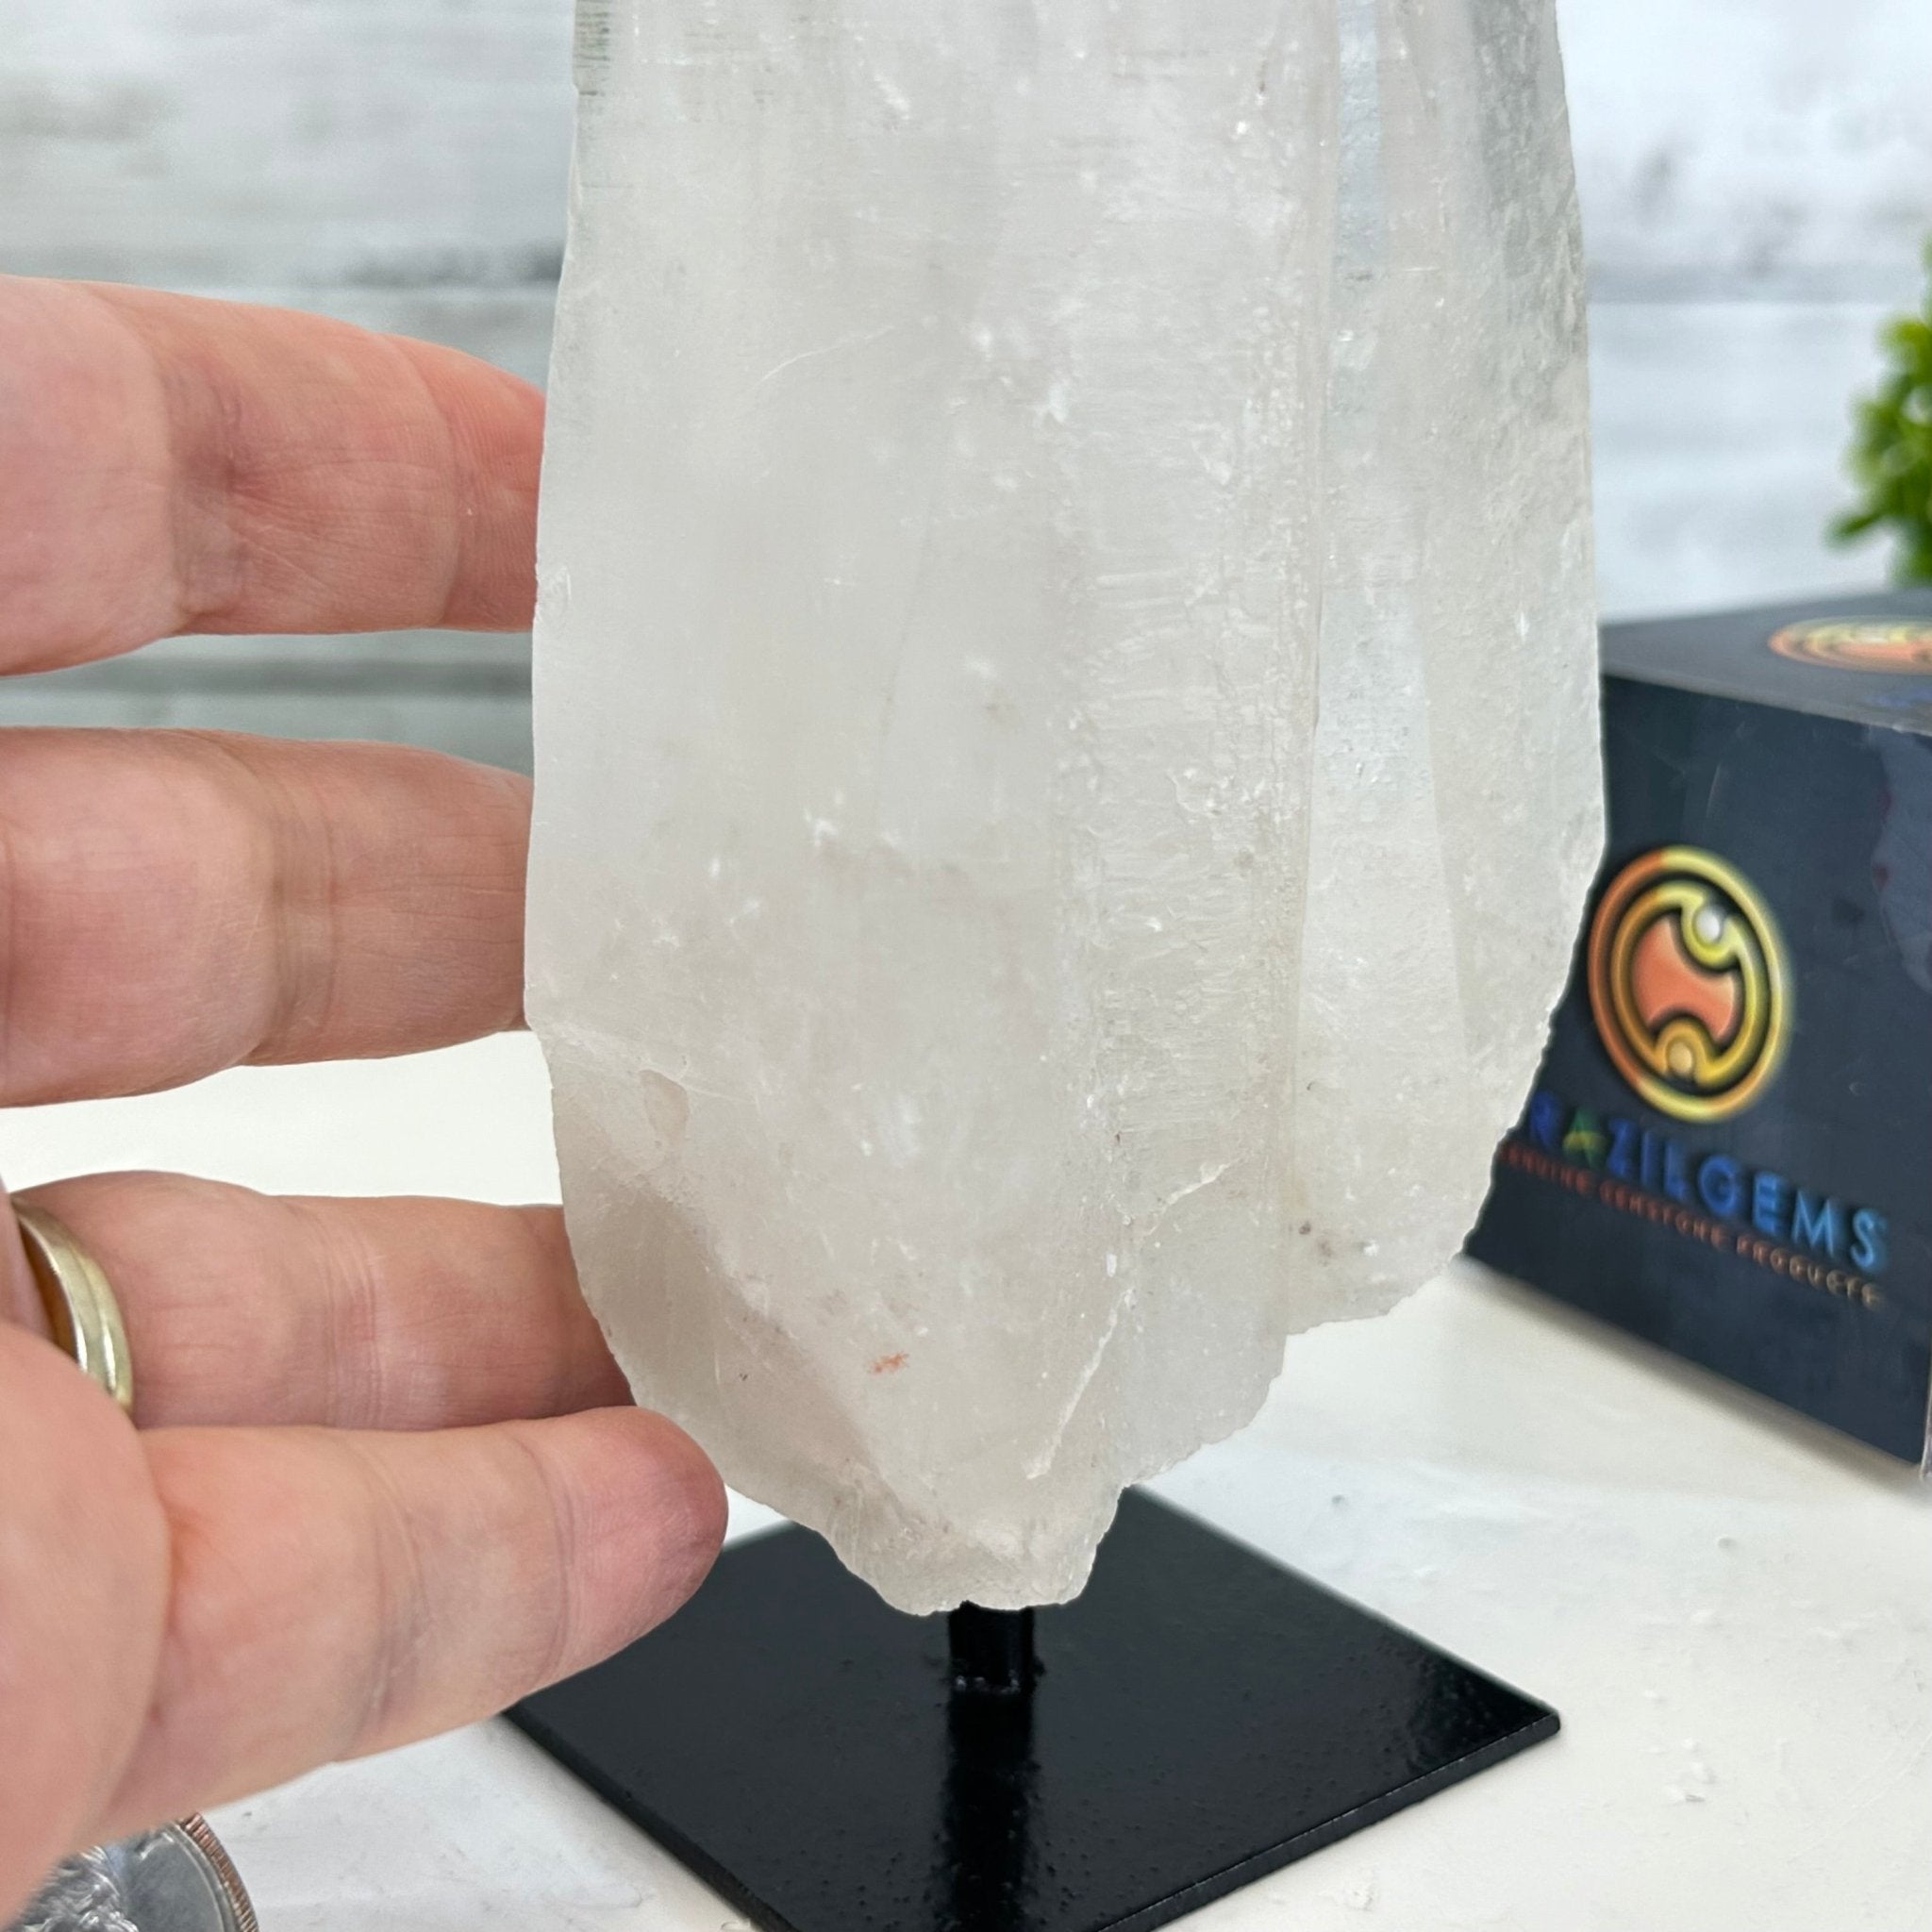 Clear Quartz Crystal Point on Fixed Base, 1.8 lbs & 6.4" Tall #3122CQ-005 - Brazil GemsBrazil GemsClear Quartz Crystal Point on Fixed Base, 1.8 lbs & 6.4" Tall #3122CQ-005Crystal Points3122CQ-005